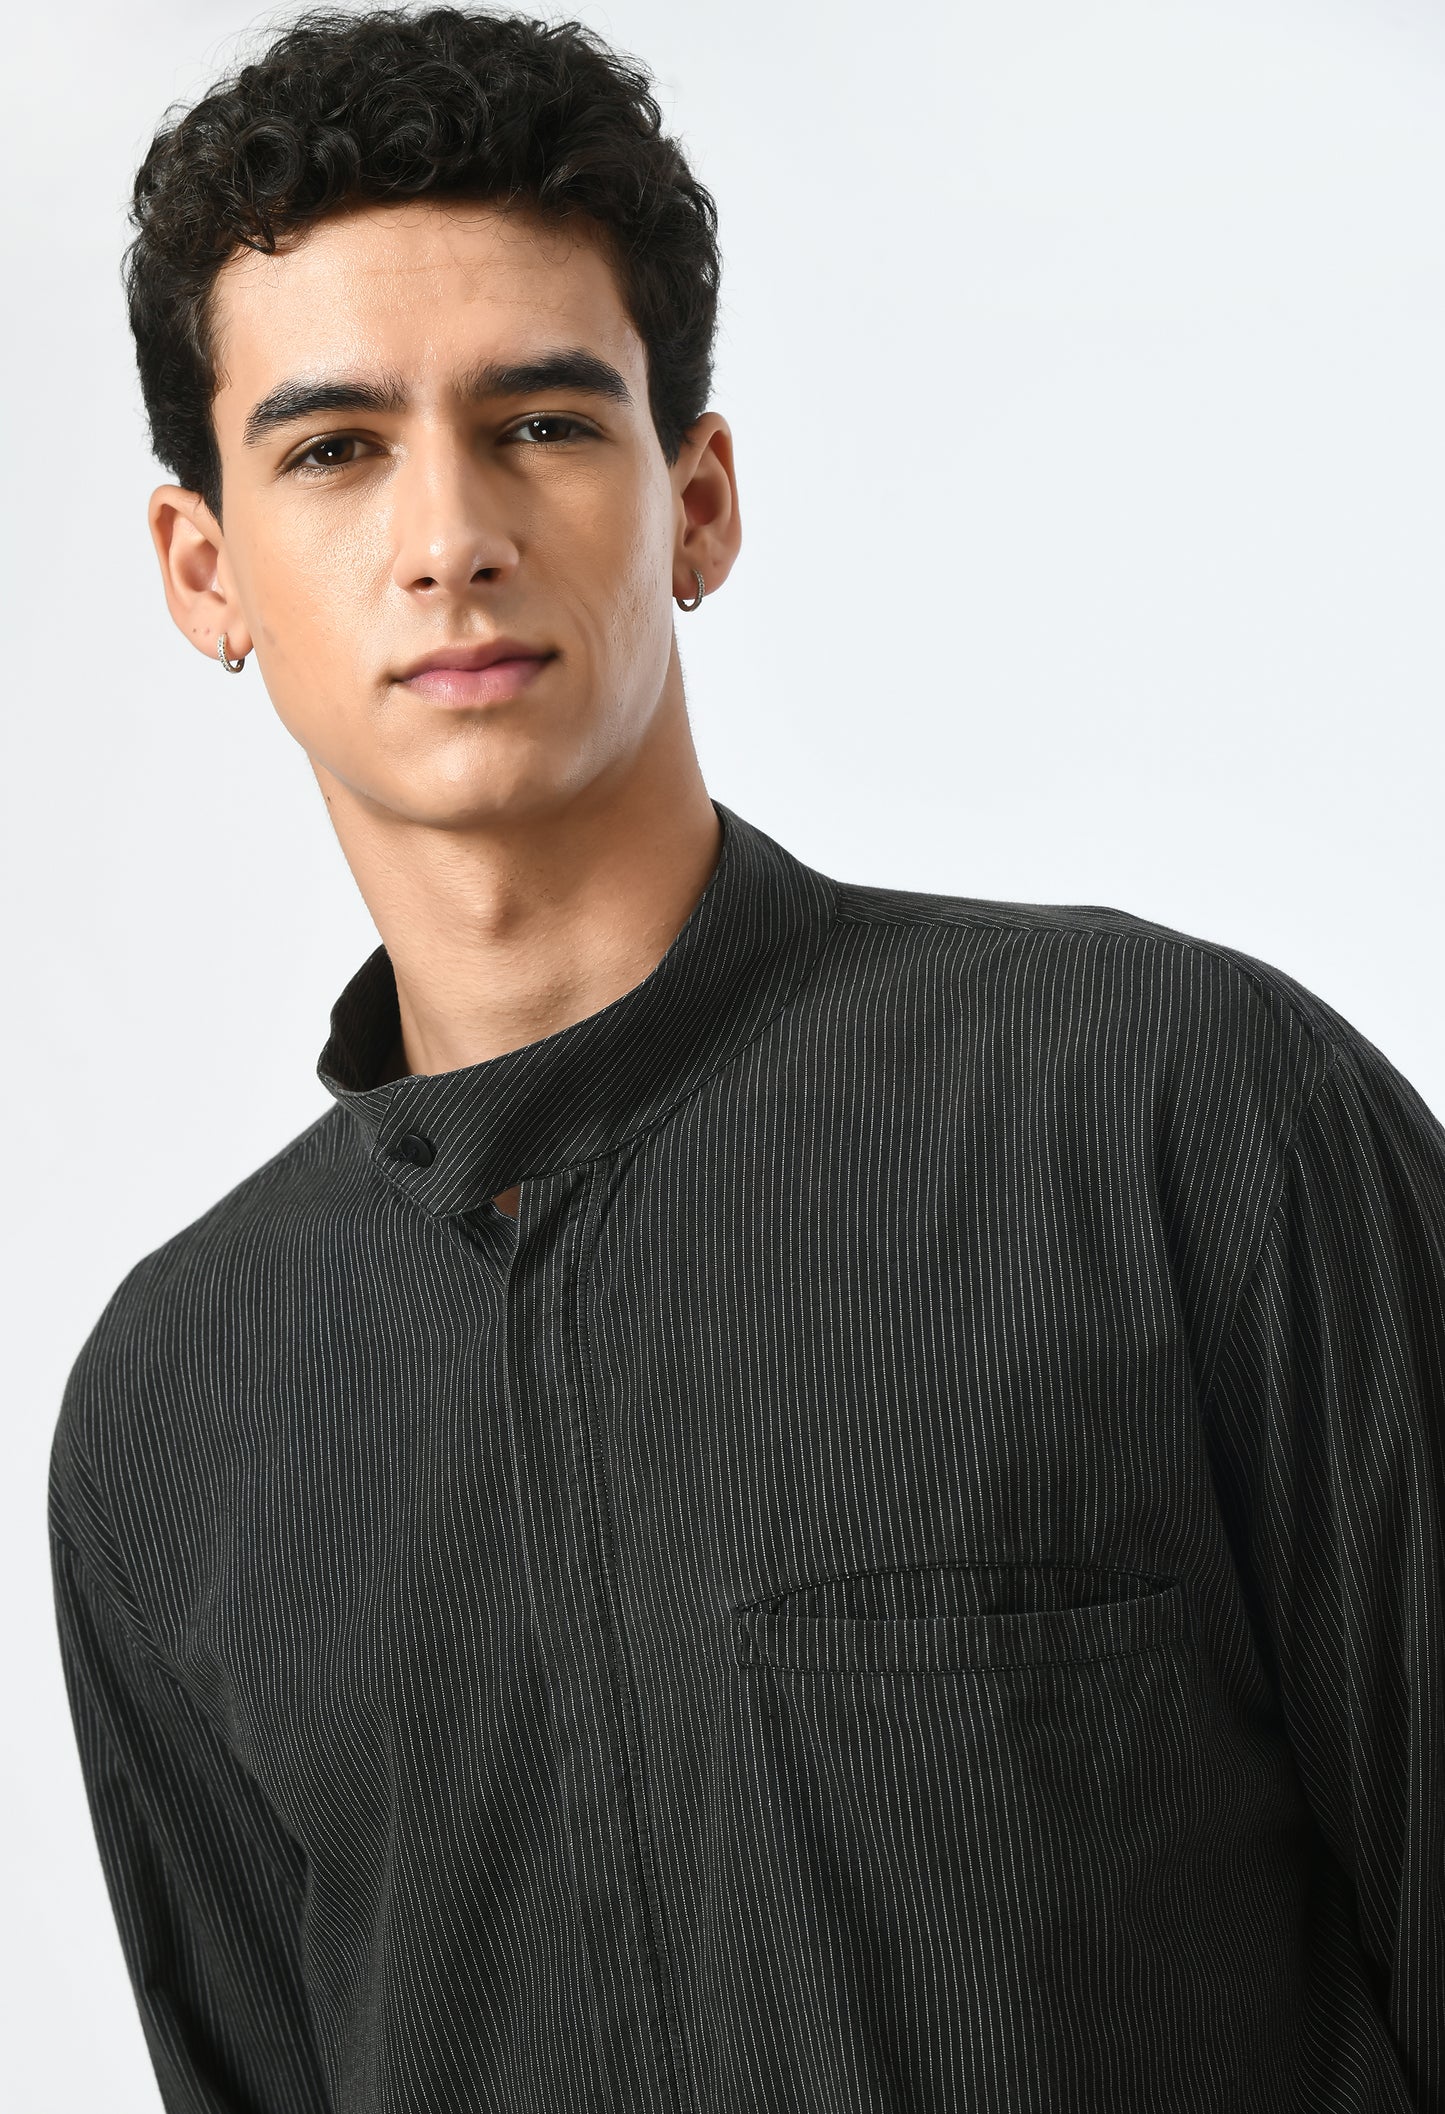 Men's charcoal shirt adorned with white stripes.